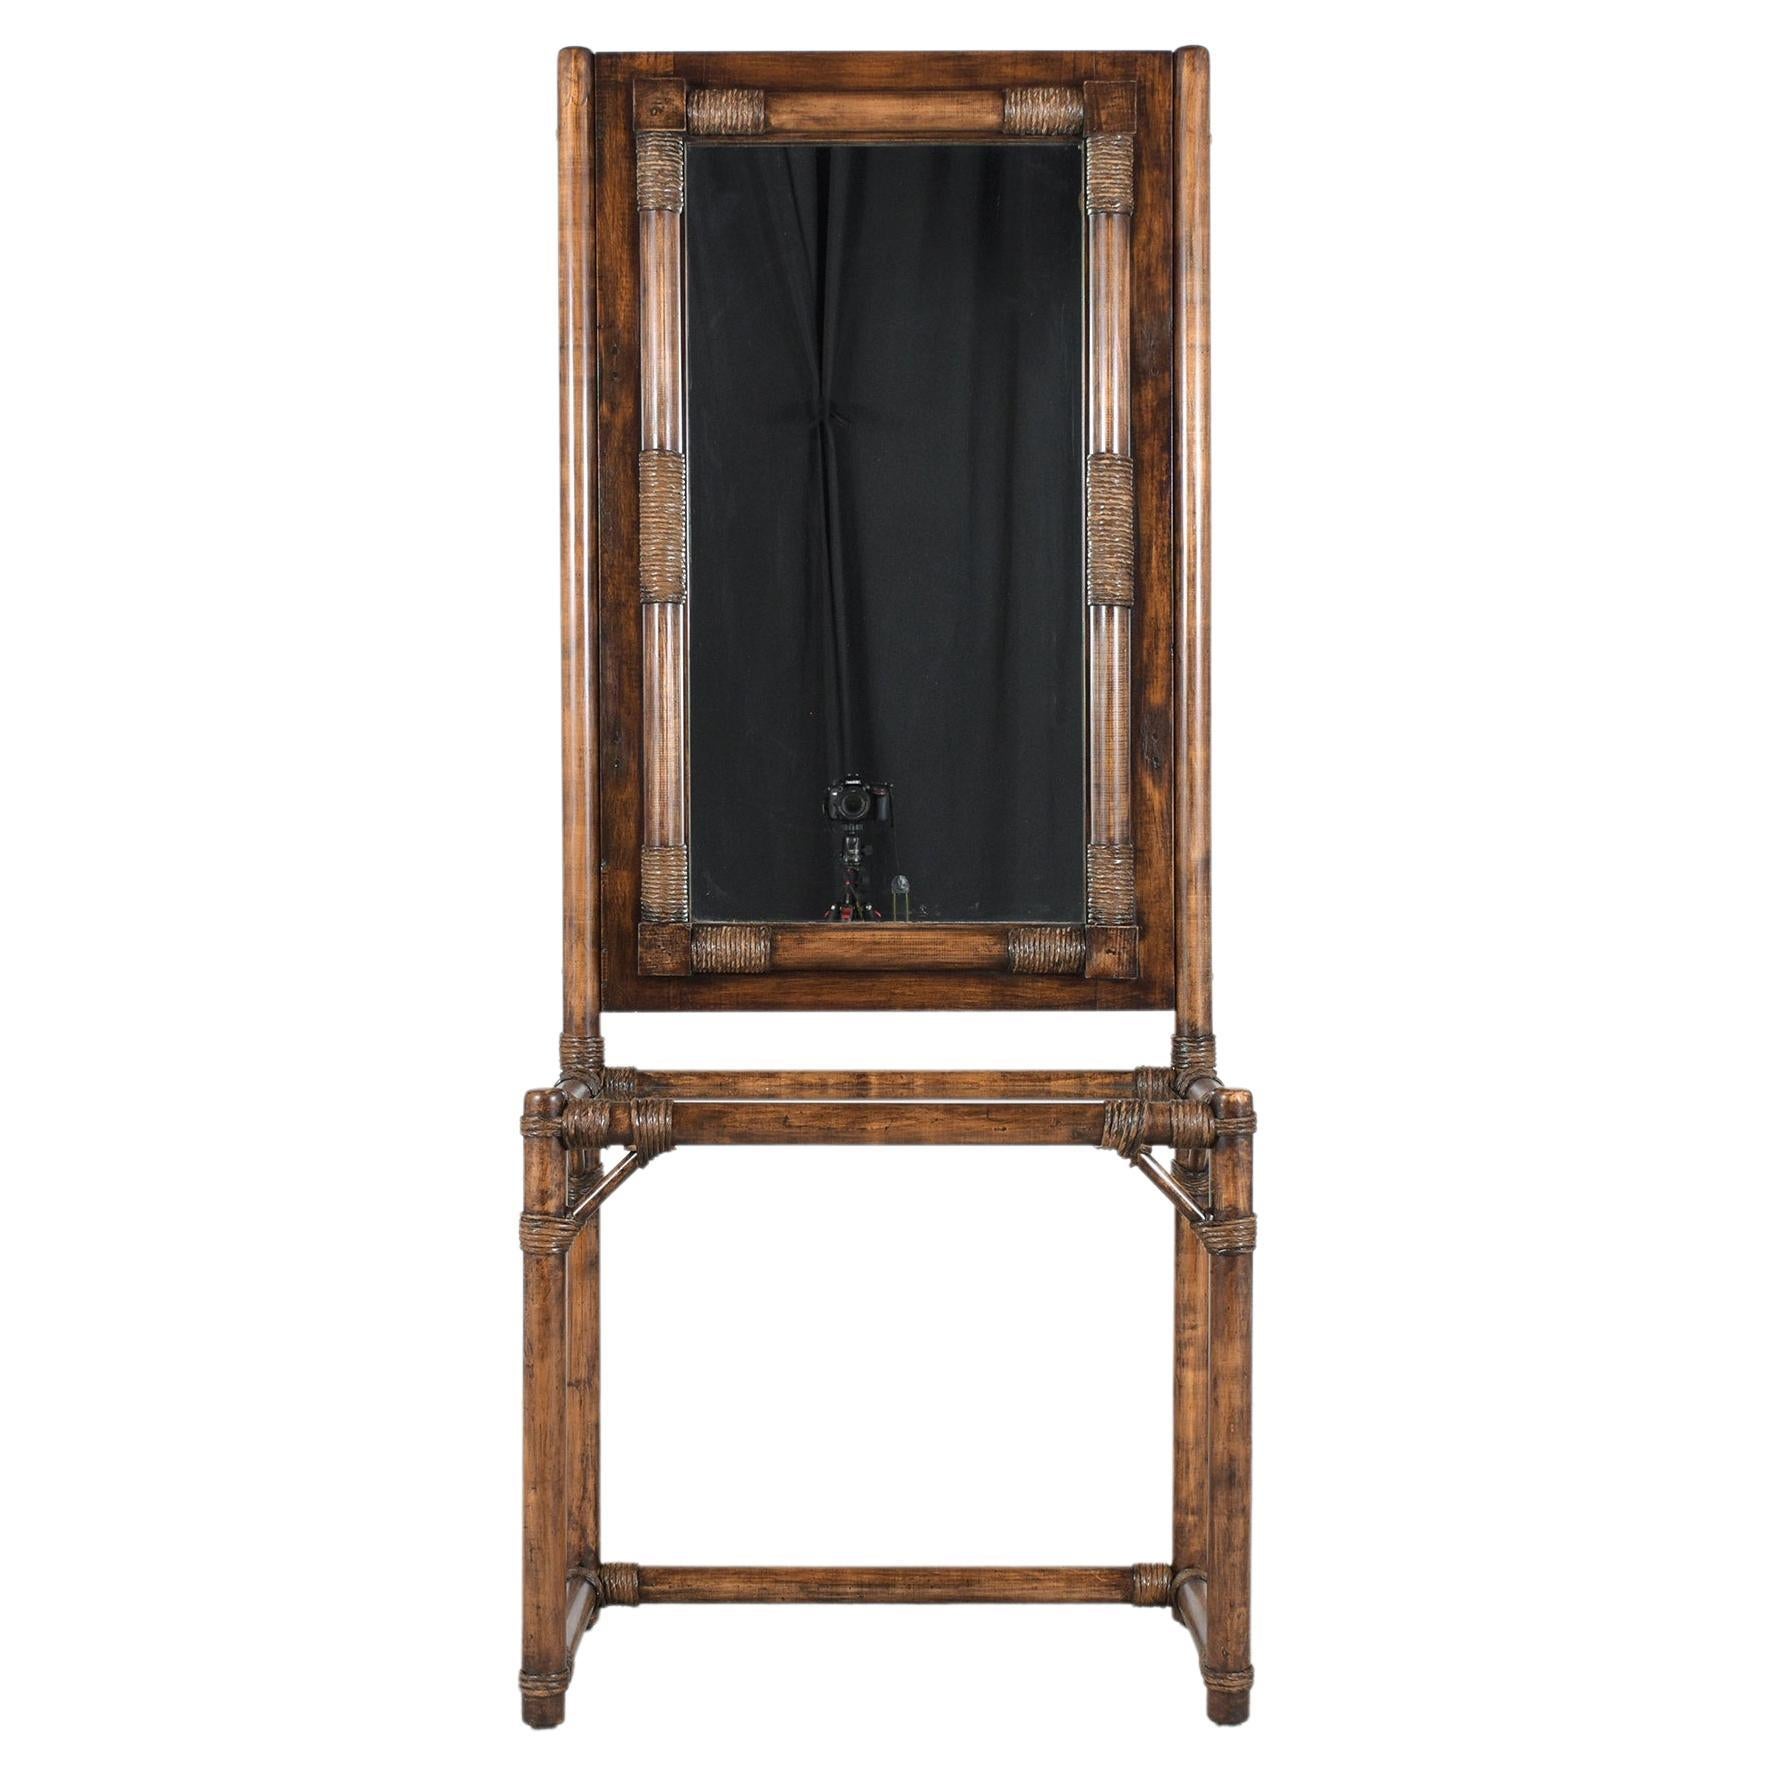 An extraordinary faux bamboo vanity table is in great condition and has been fully restored by our team of craftsmen. This lovely piece features a bamboo design stained in a walnut color with a beautiful patina finish framed rectangular mirror fully